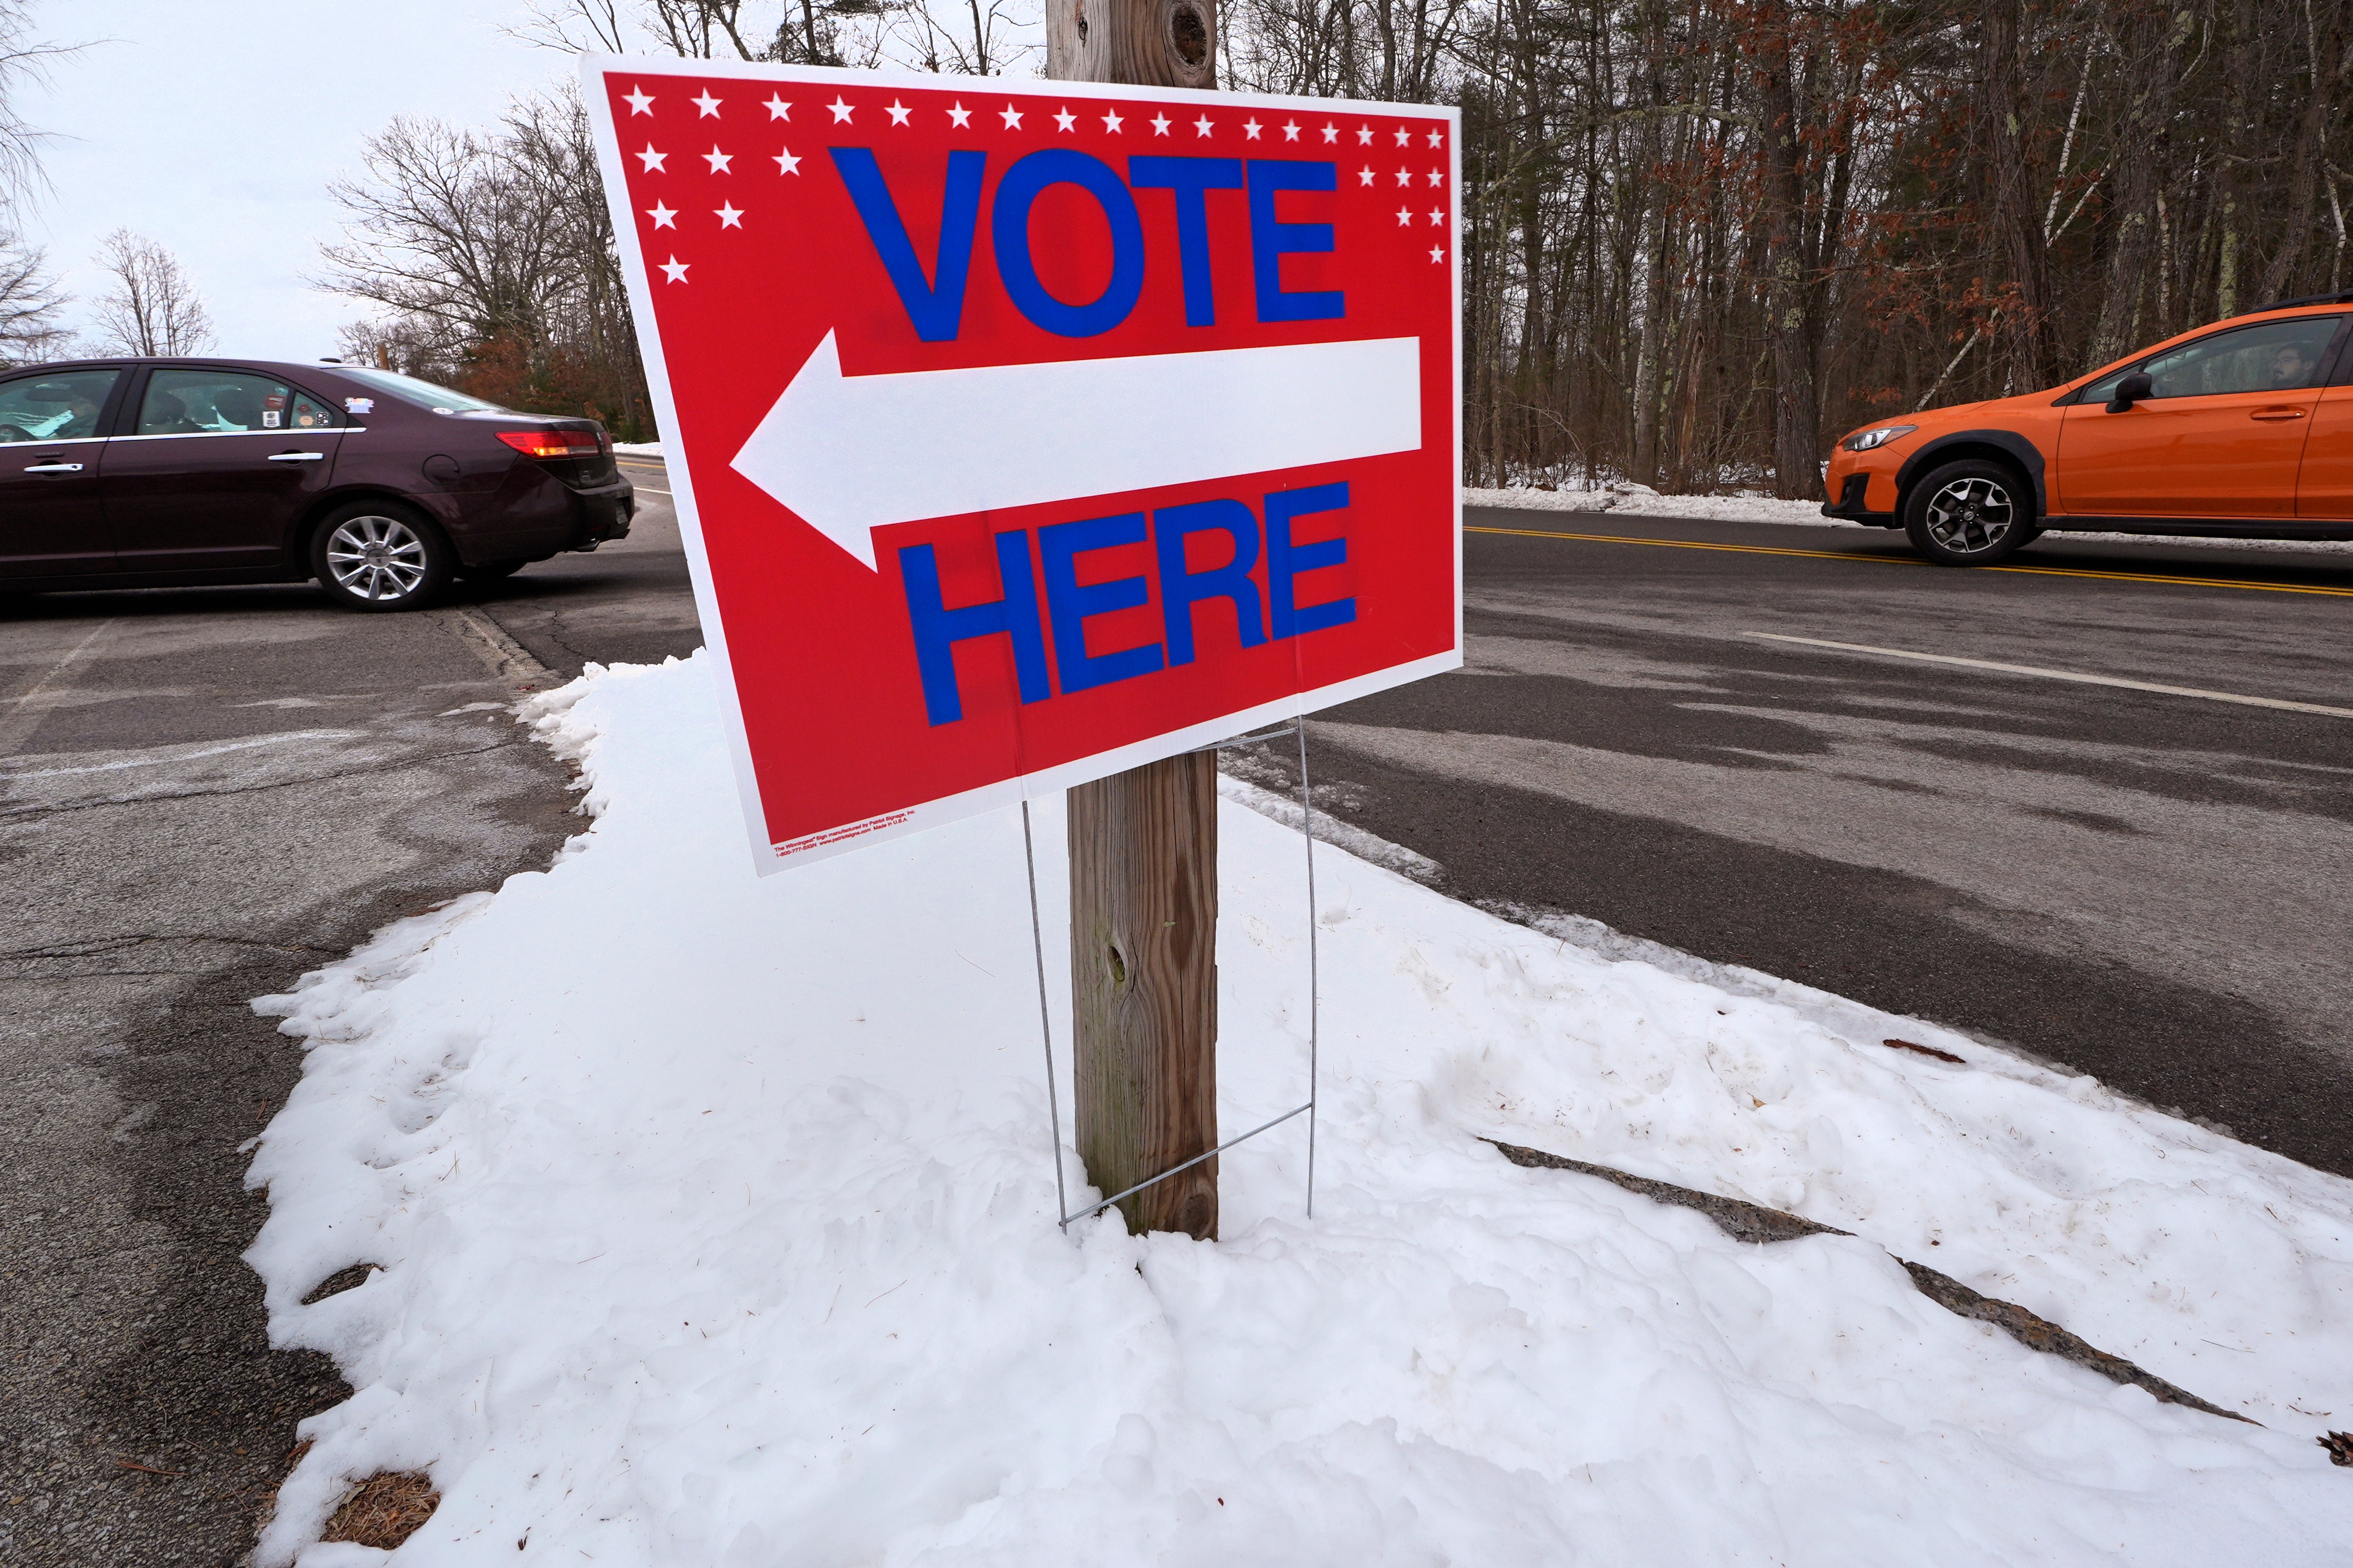 Drivers follow the arrows to cast their vote, in Auburn, New Hampshire